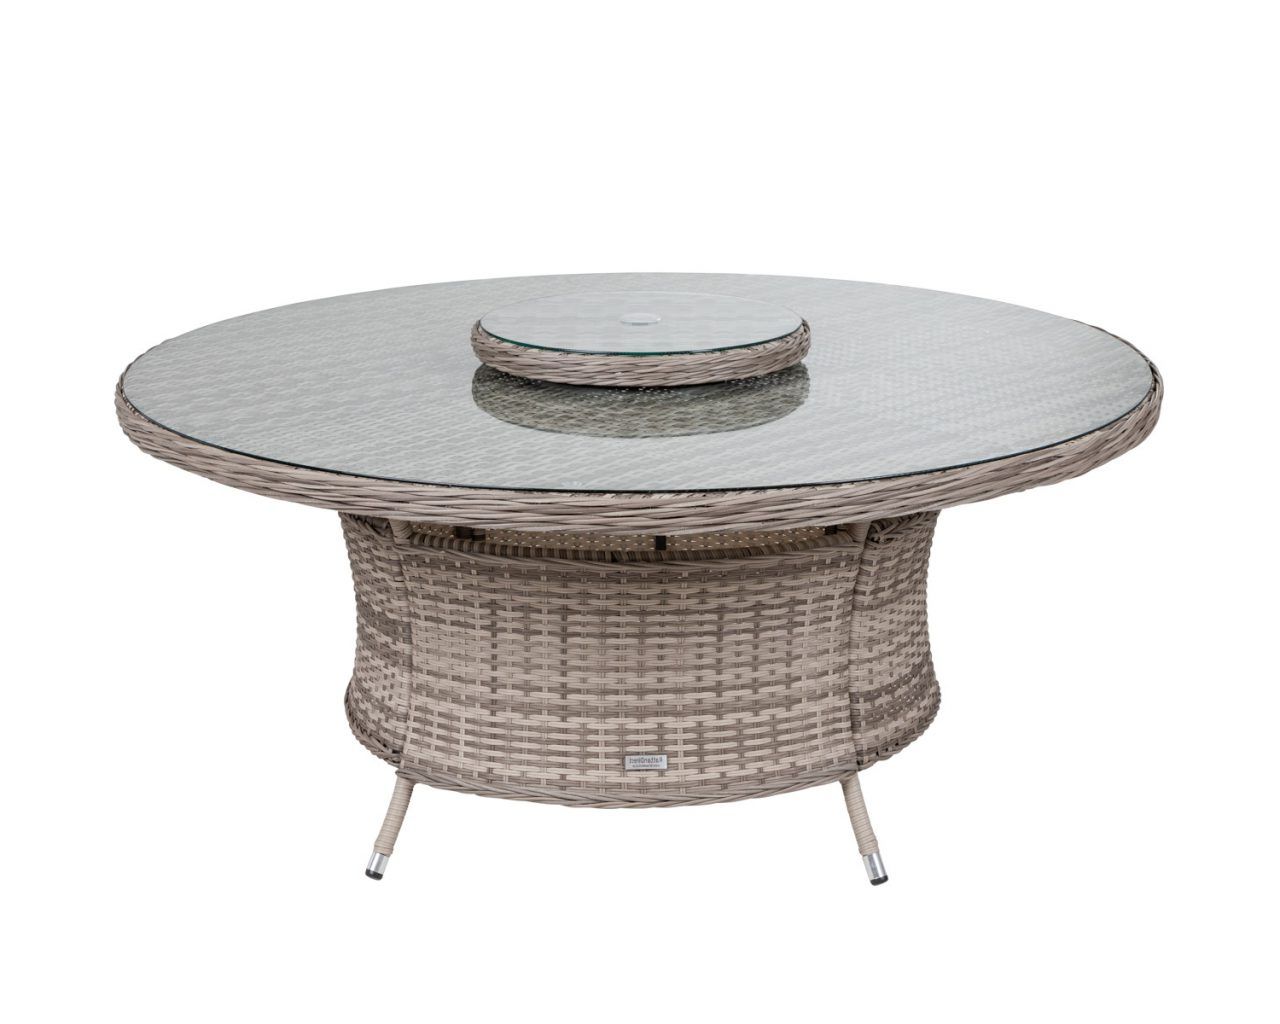 Distressed Wicker Patio Dining Set Throughout Most Up To Date Large Round Rattan Garden Dining Table With Lazy Susan In Grey – Rattan (View 8 of 15)